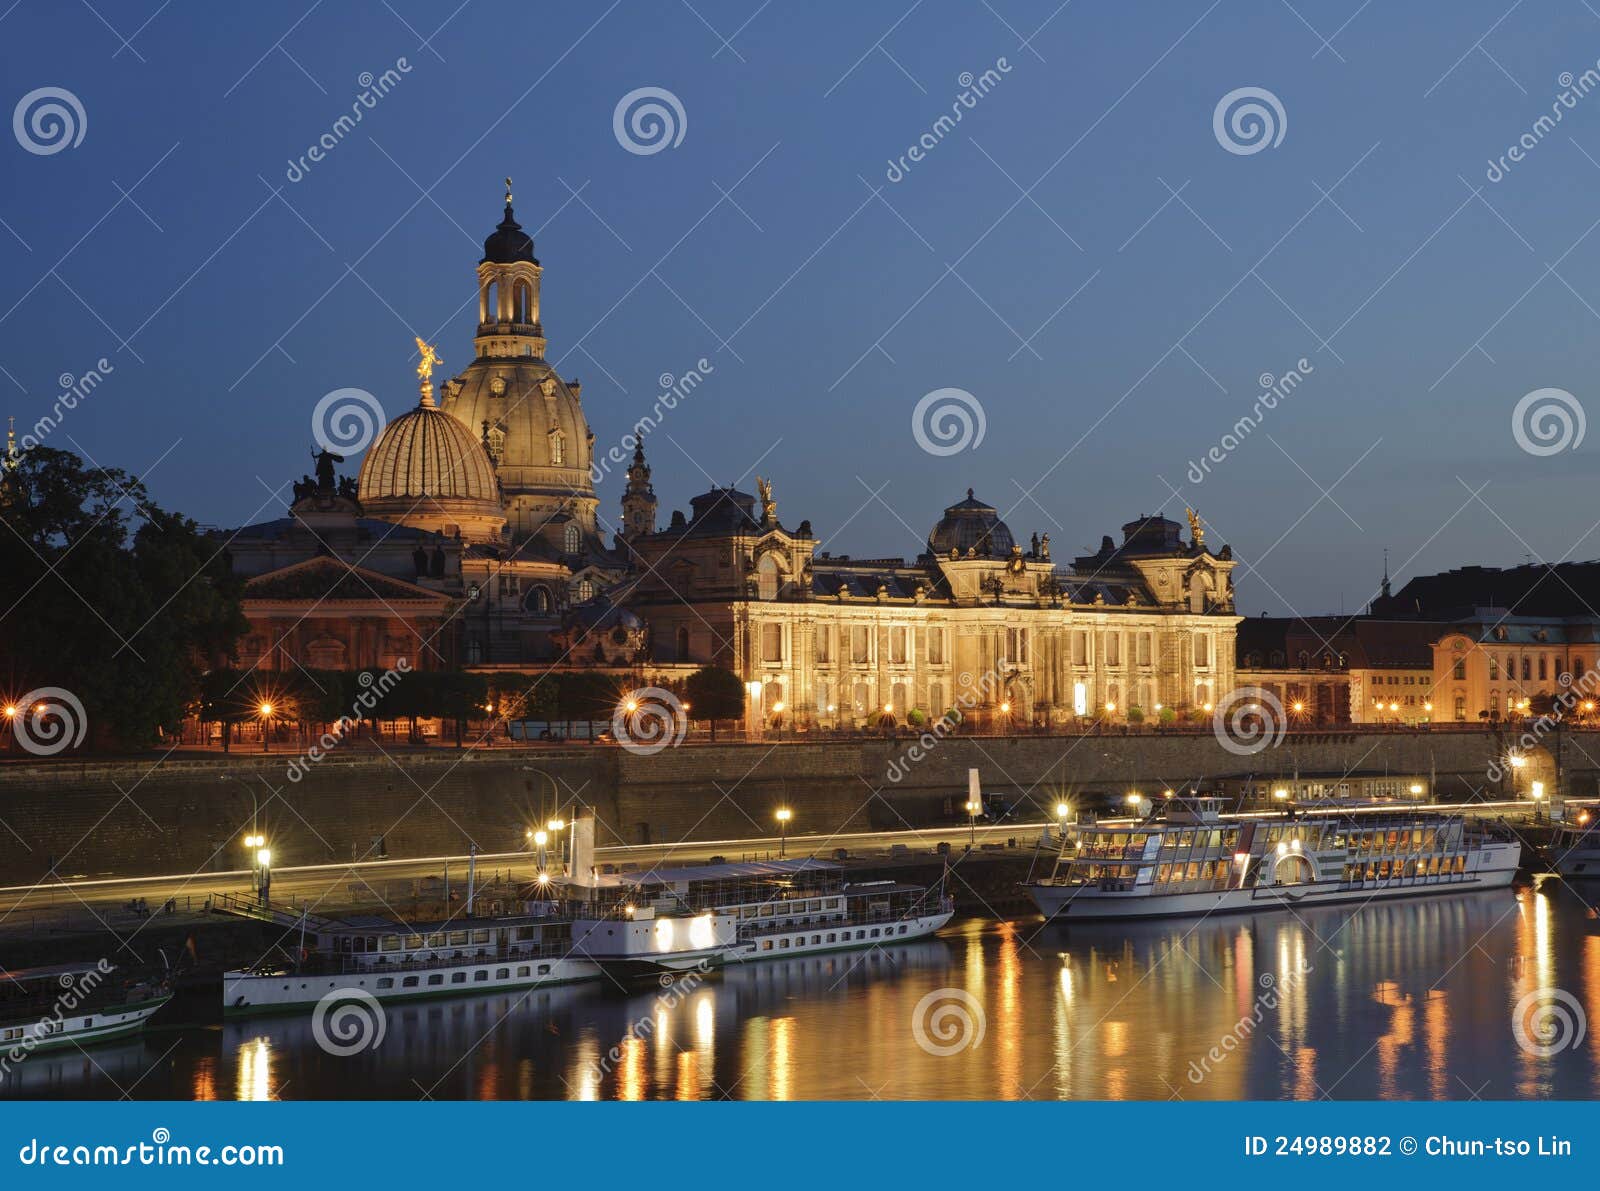 Stock Photography: City night scenic in Dresden.